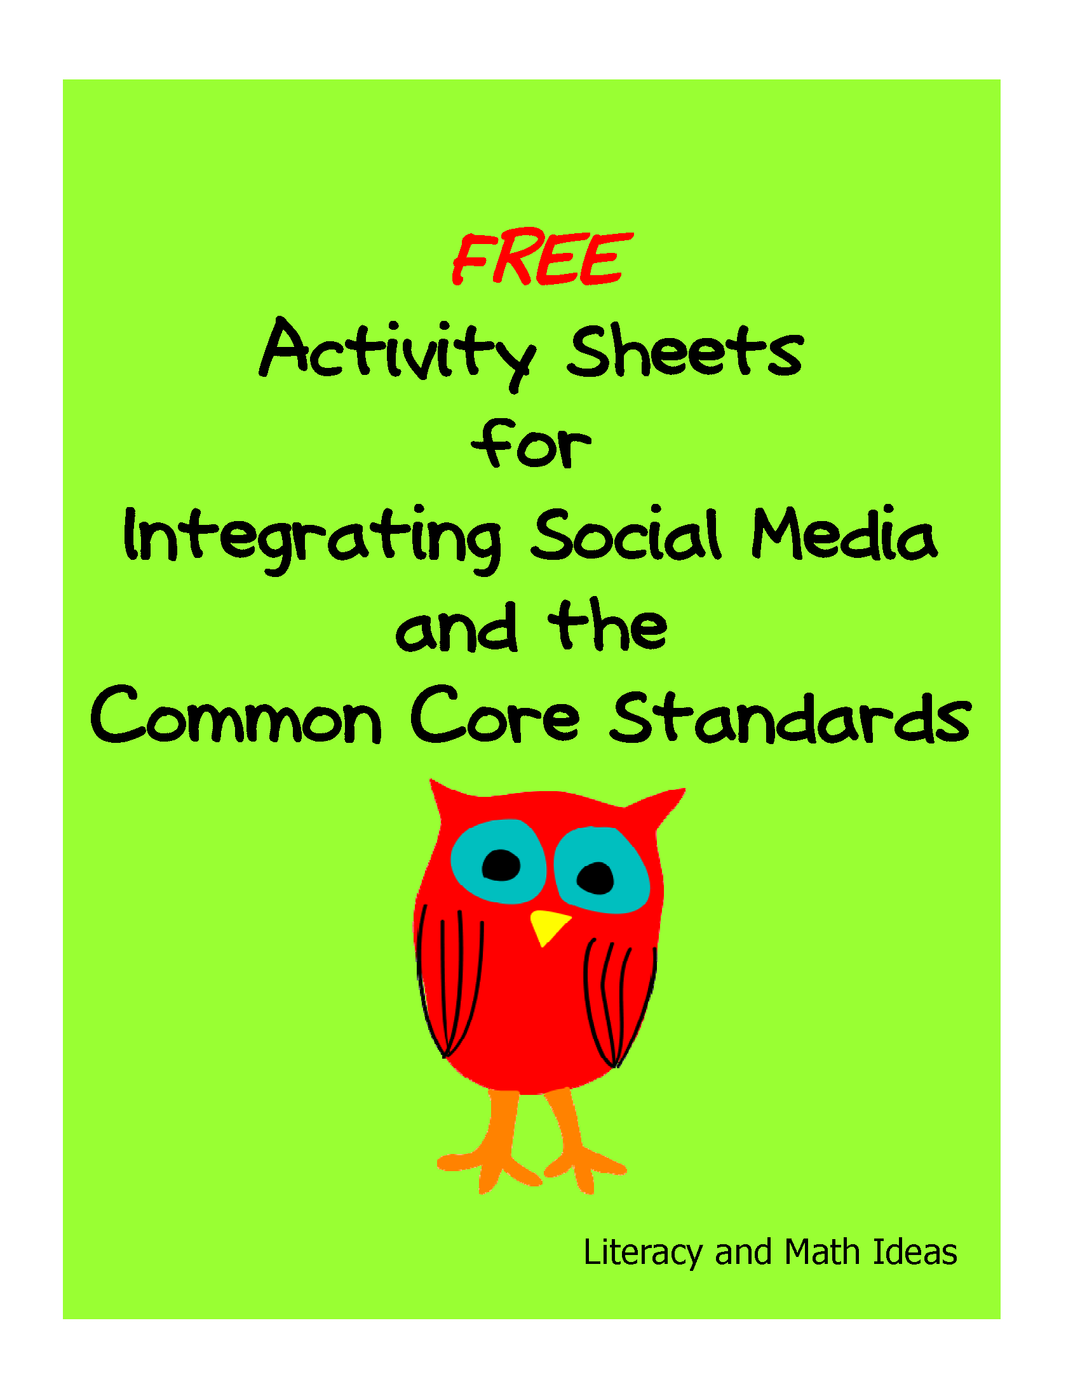 Activity Sheets for Integrating Social Media and the Common Core